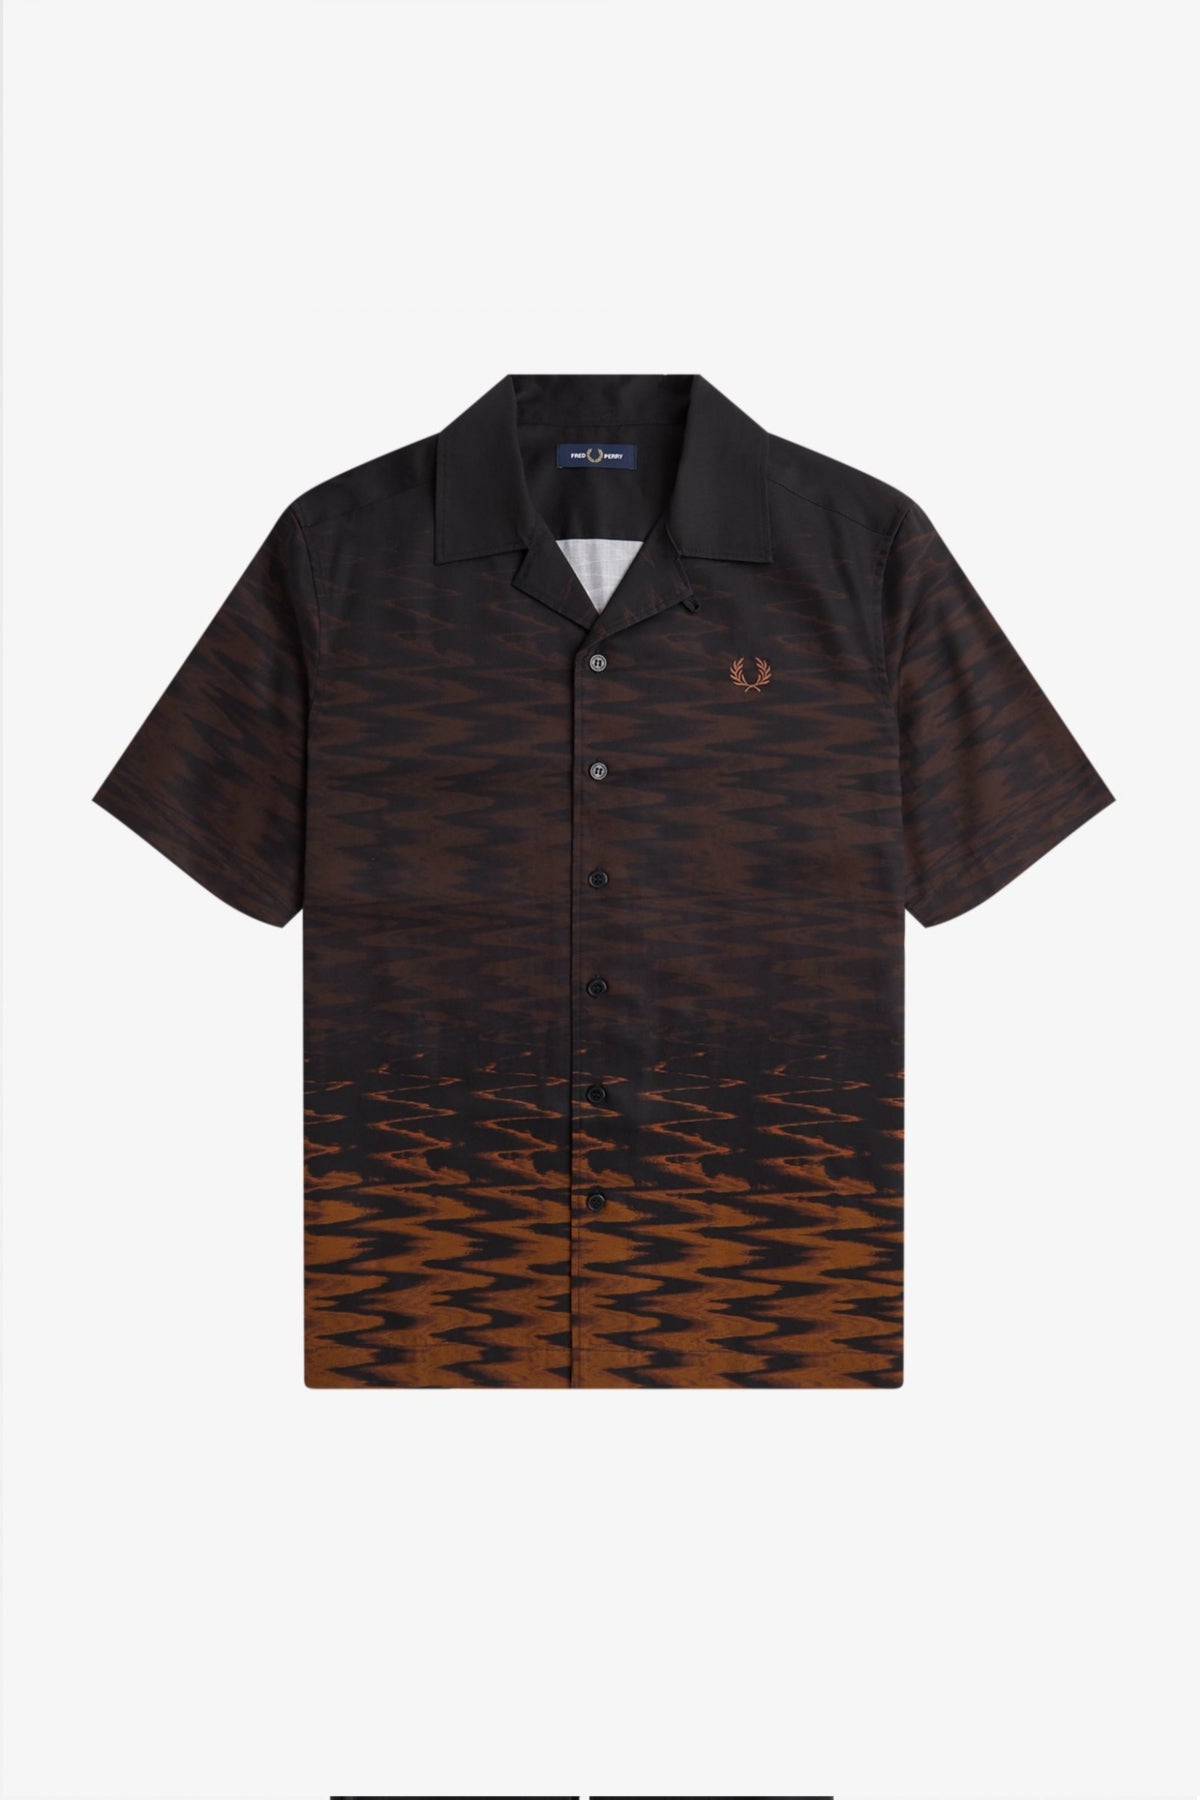 FRED PERRY WAVE GRAPHIC REVERE COLLAR en color NEGRO  (2)